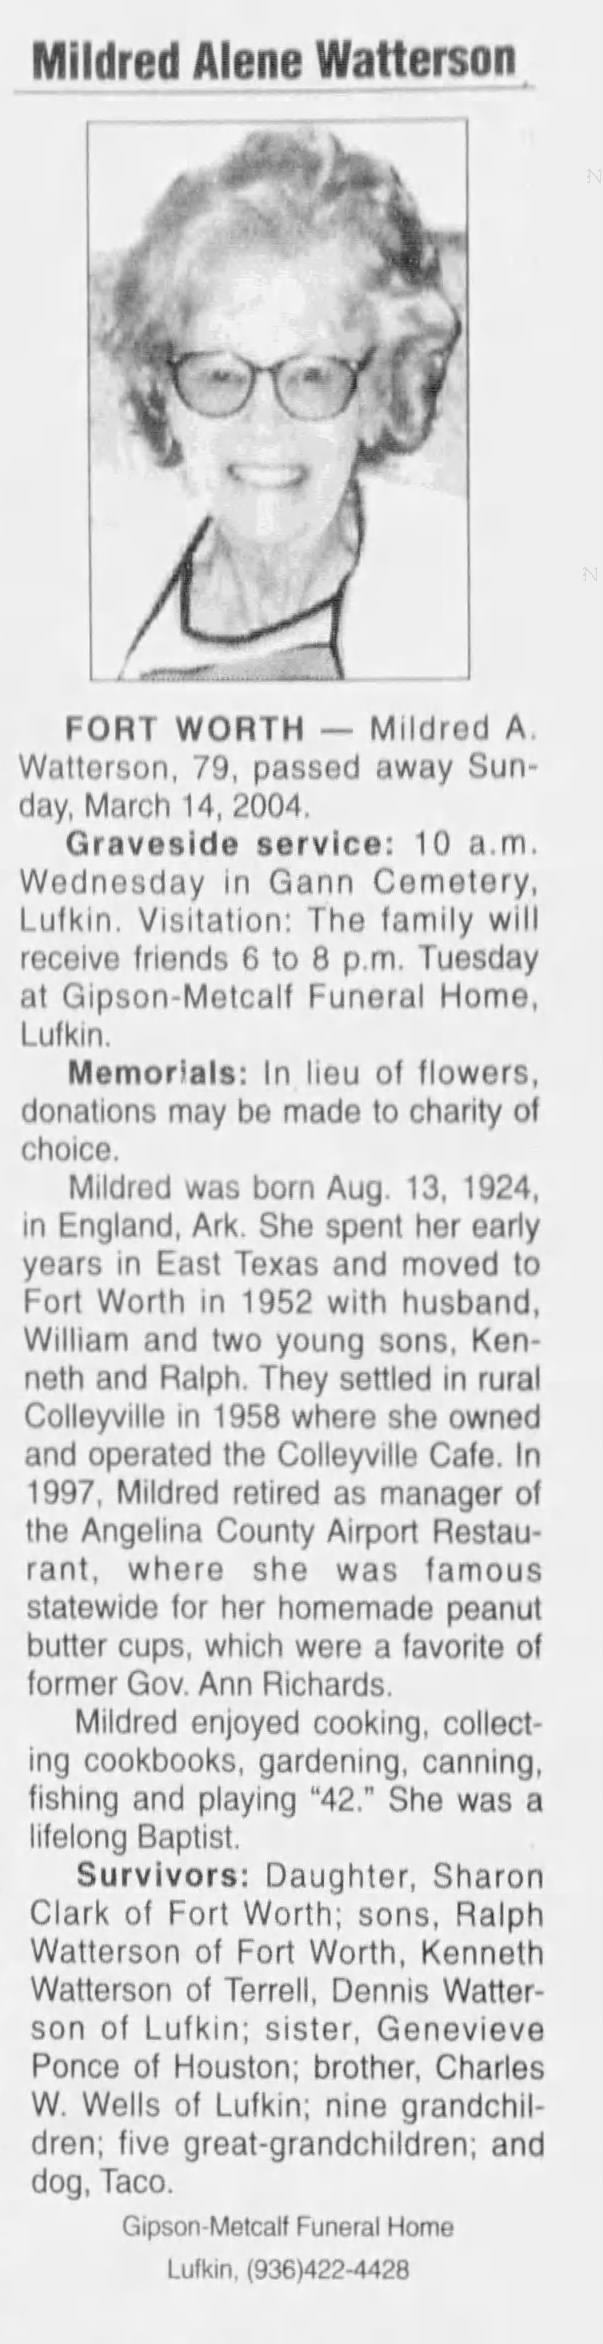 Obituary for Mildred Alene Watterson, 1924-2004 (Aged 79)